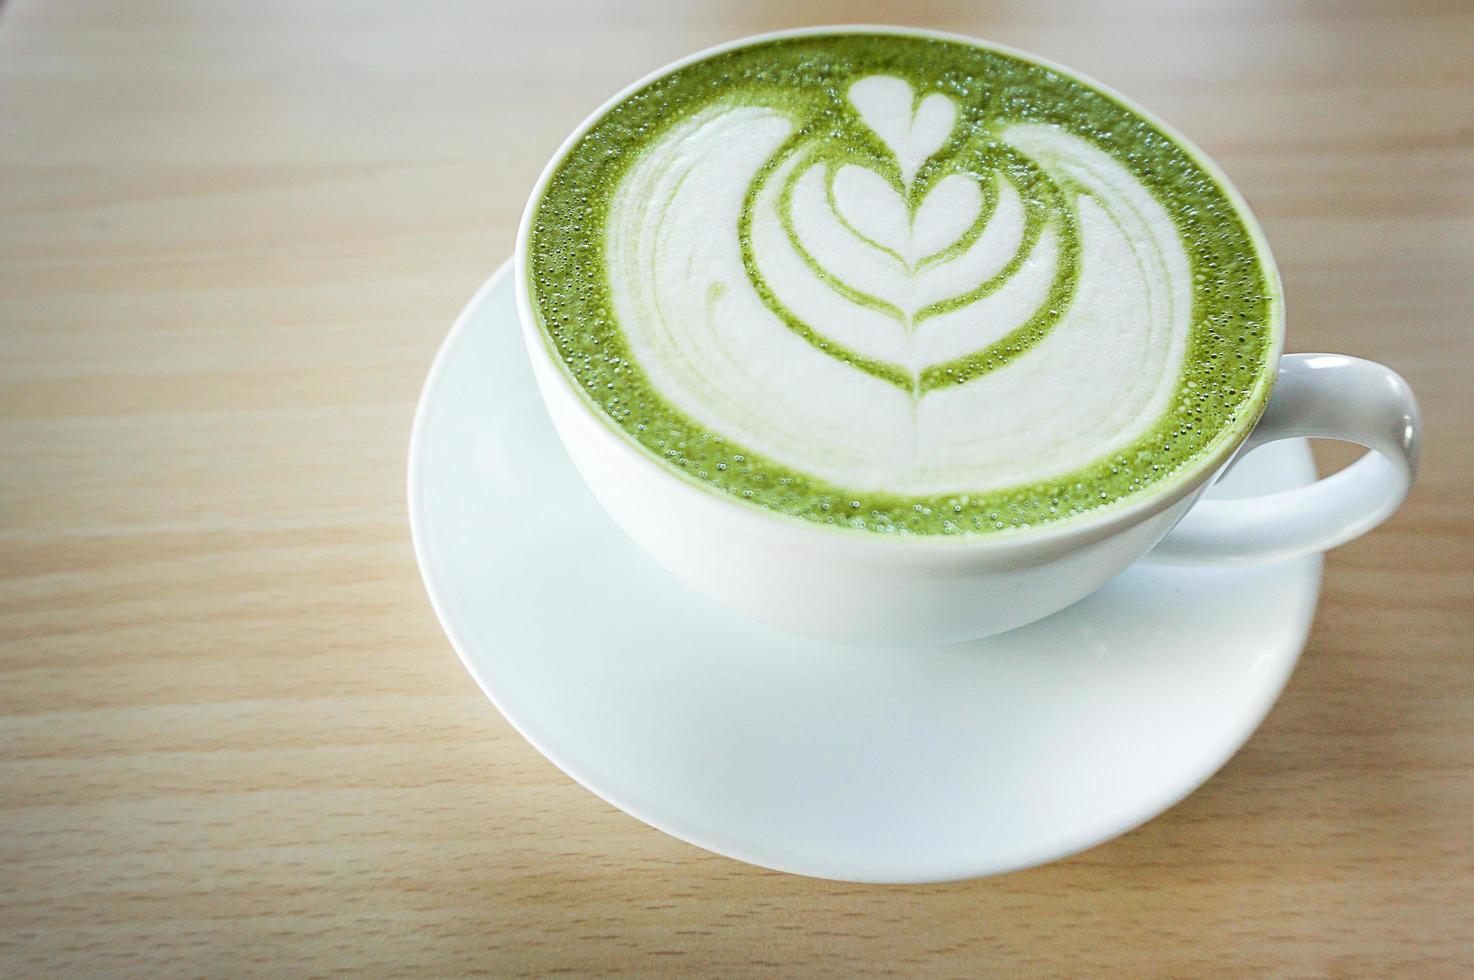 matcha green tea latte with heart shape latte art in white cup on wooden table photo